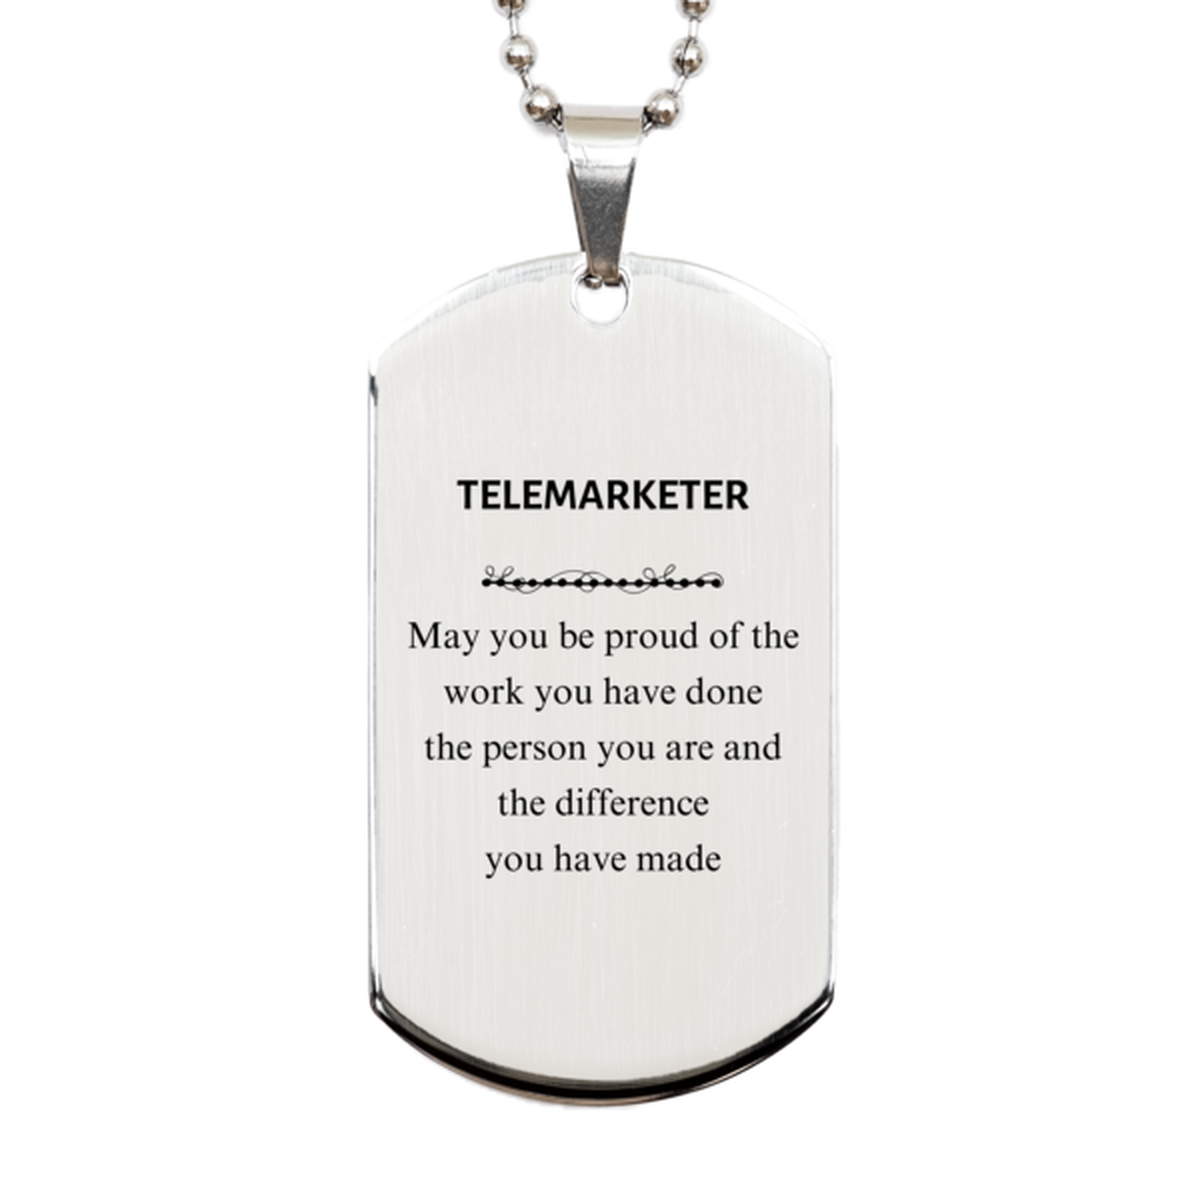 Telemarketer May you be proud of the work you have done, Retirement Telemarketer Silver Dog Tag for Colleague Appreciation Gifts Amazing for Telemarketer